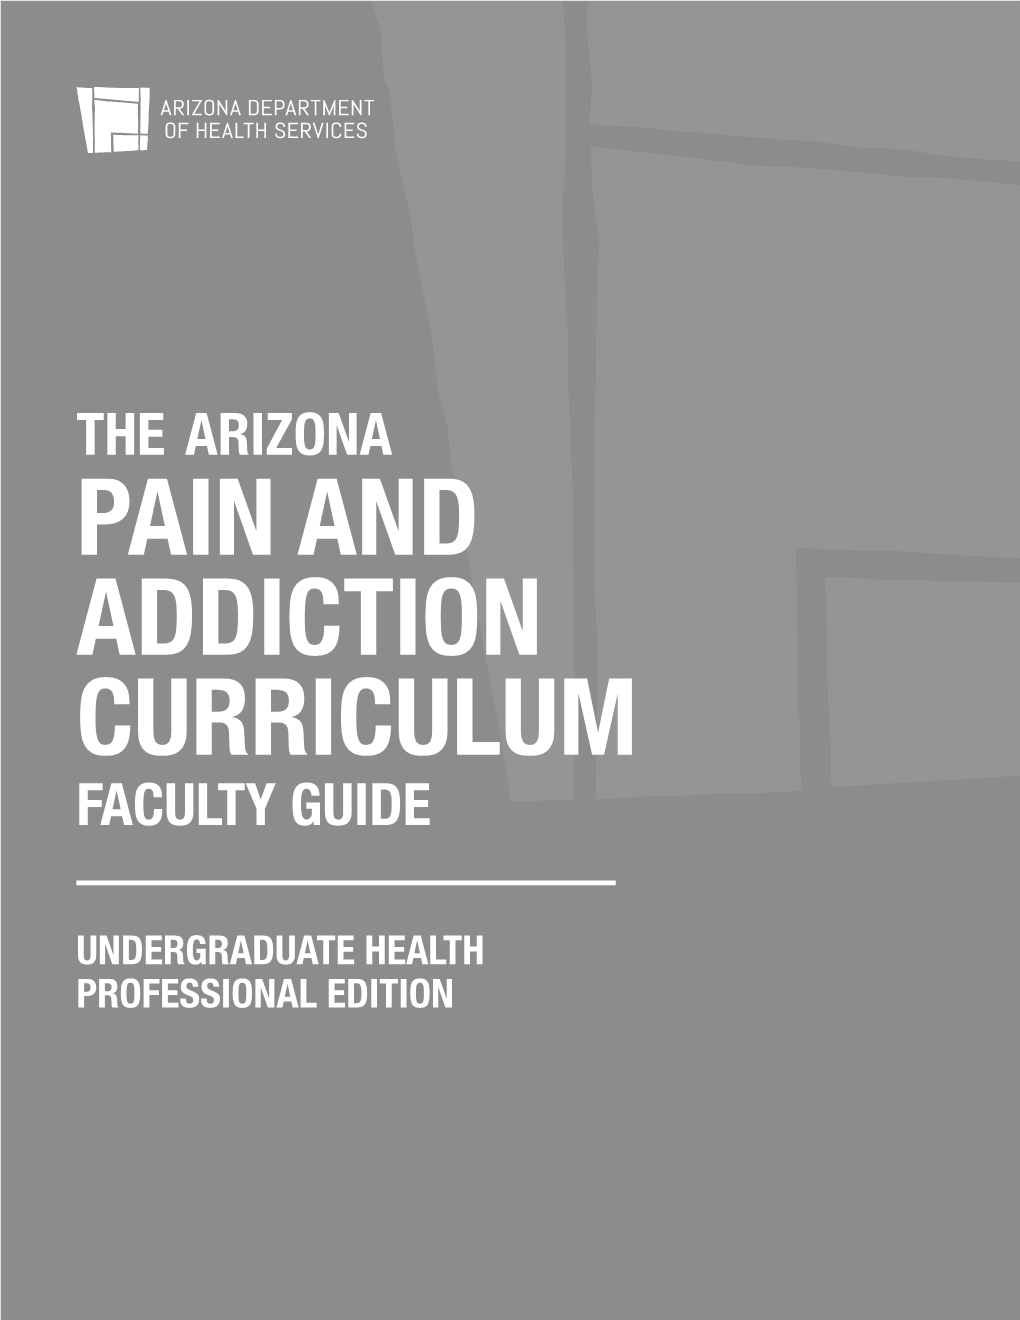 Arizona Pain and Addiction Curriculum Faculty Guide